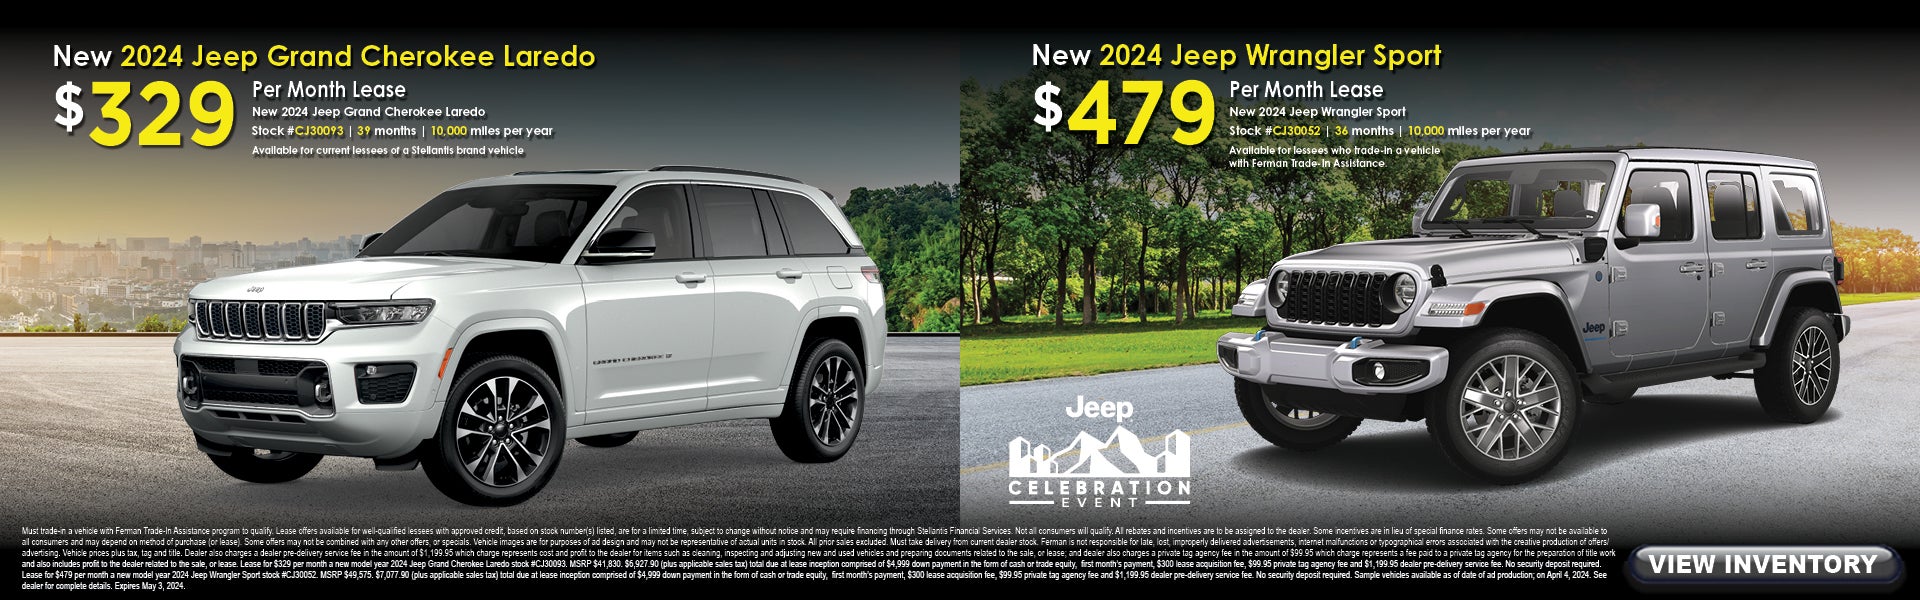 April Leases on New Jeep Grand Cherokee and Wrangler